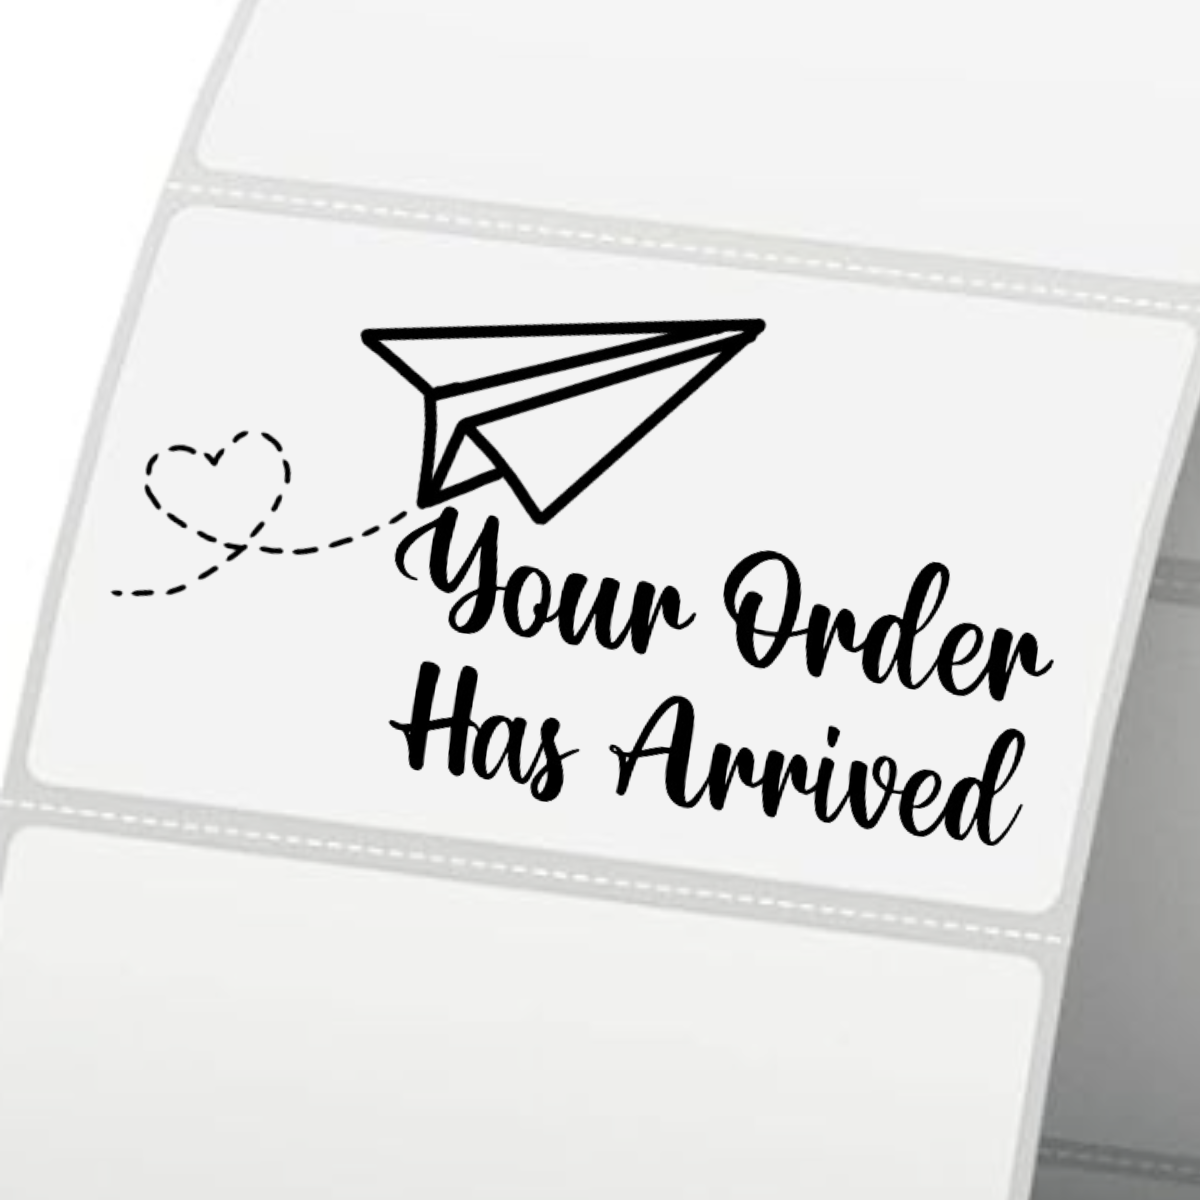 Happy With Your Order Camera